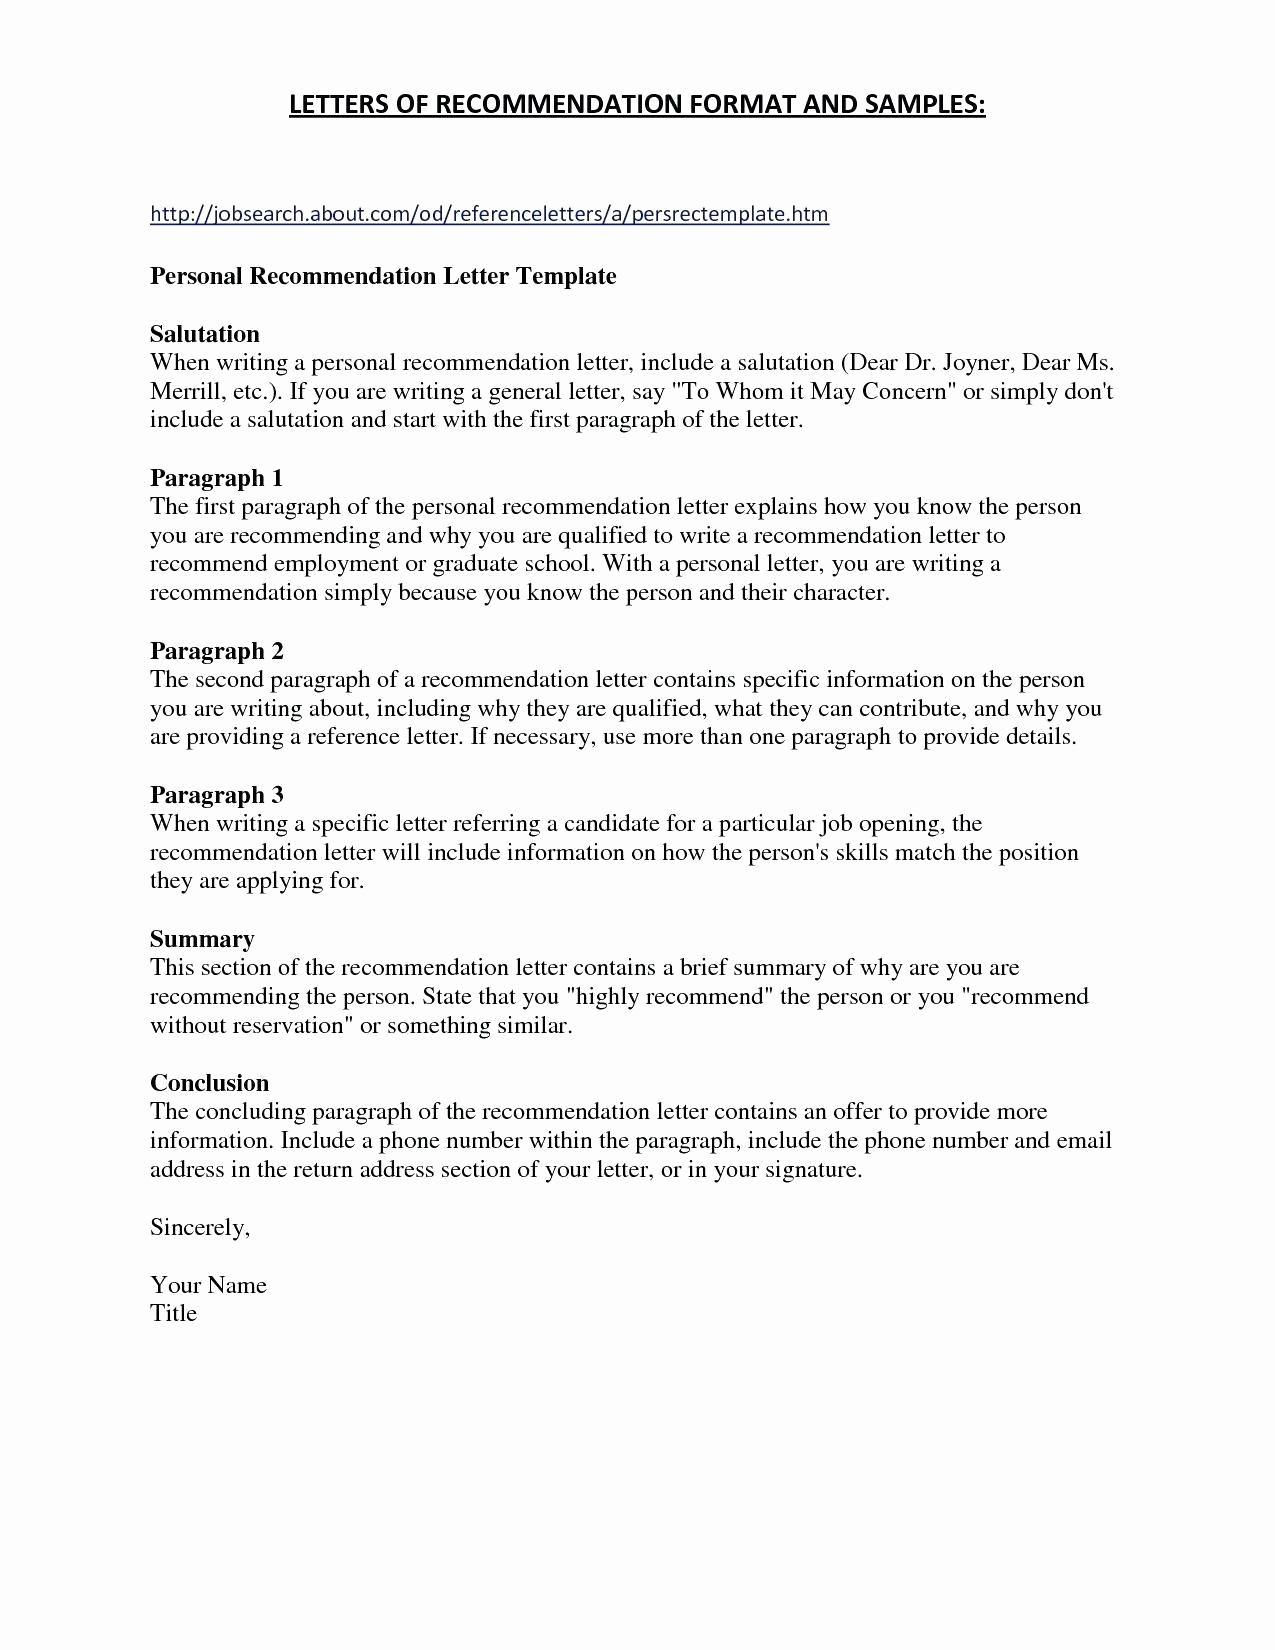 Scholarship Reference Letter Template - Sample Personalcharacter Reference Letter Created Using Ms Word